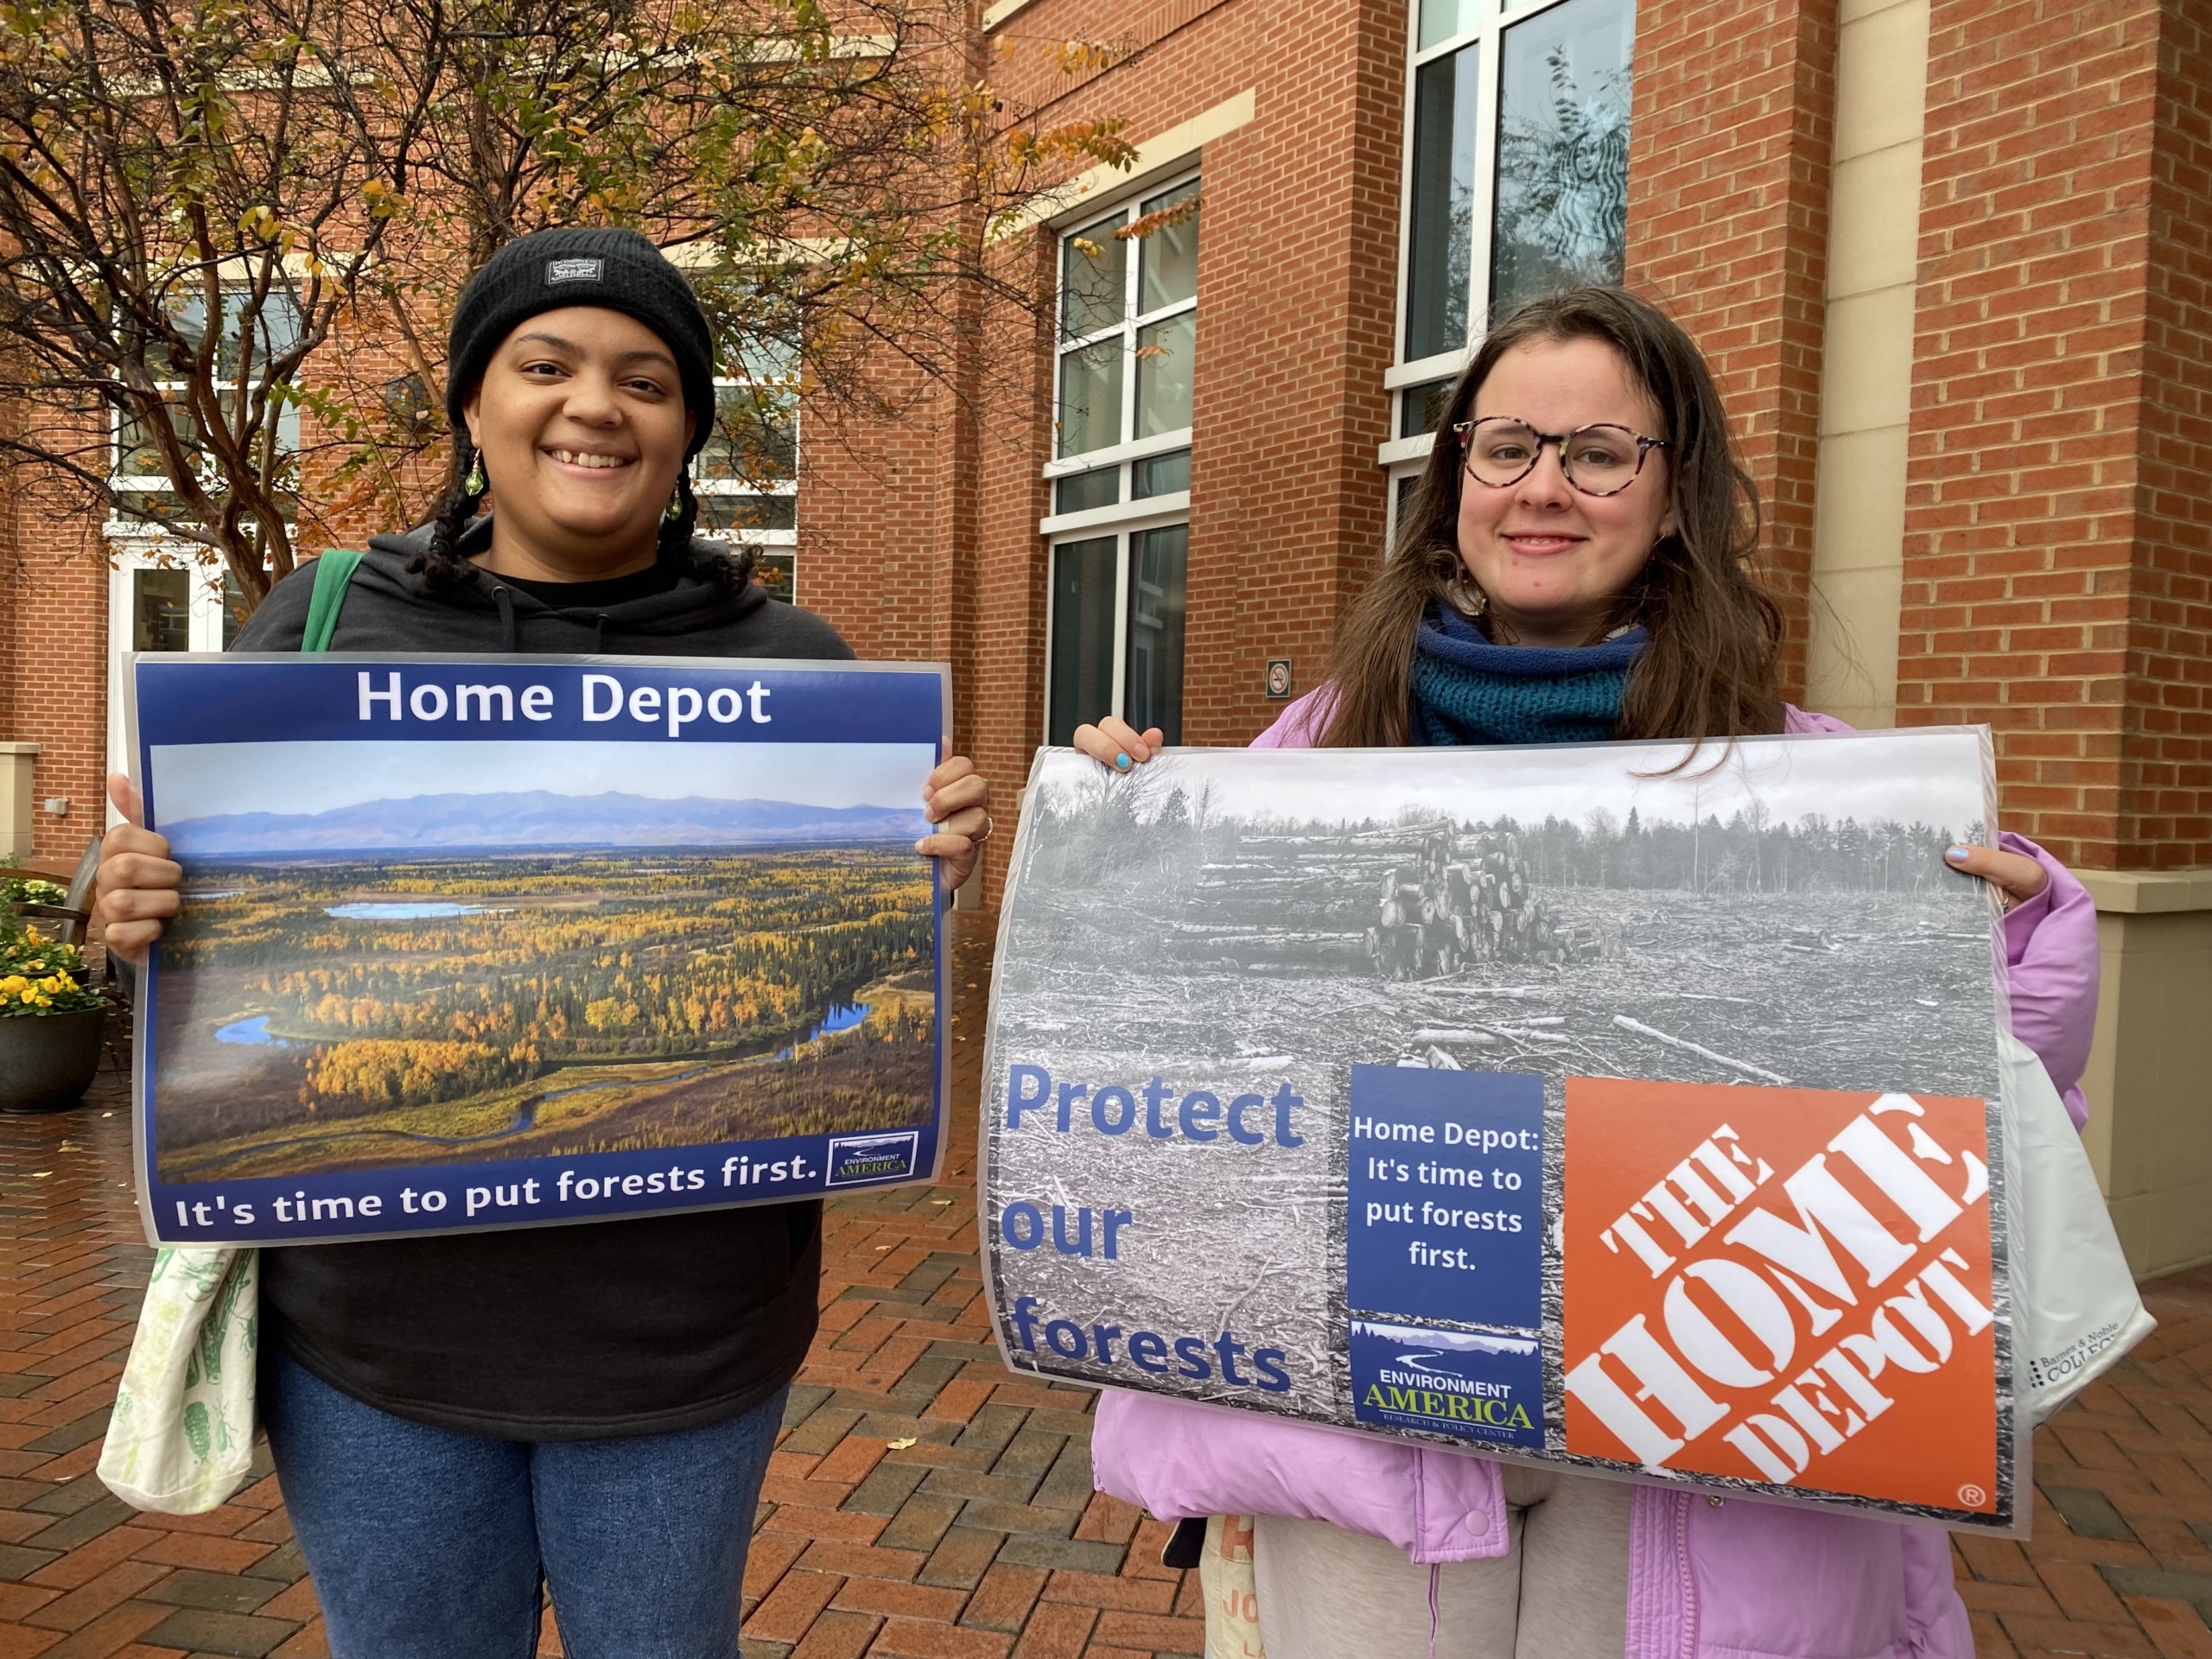 2 students hold signs calling on the home depot to put forests first